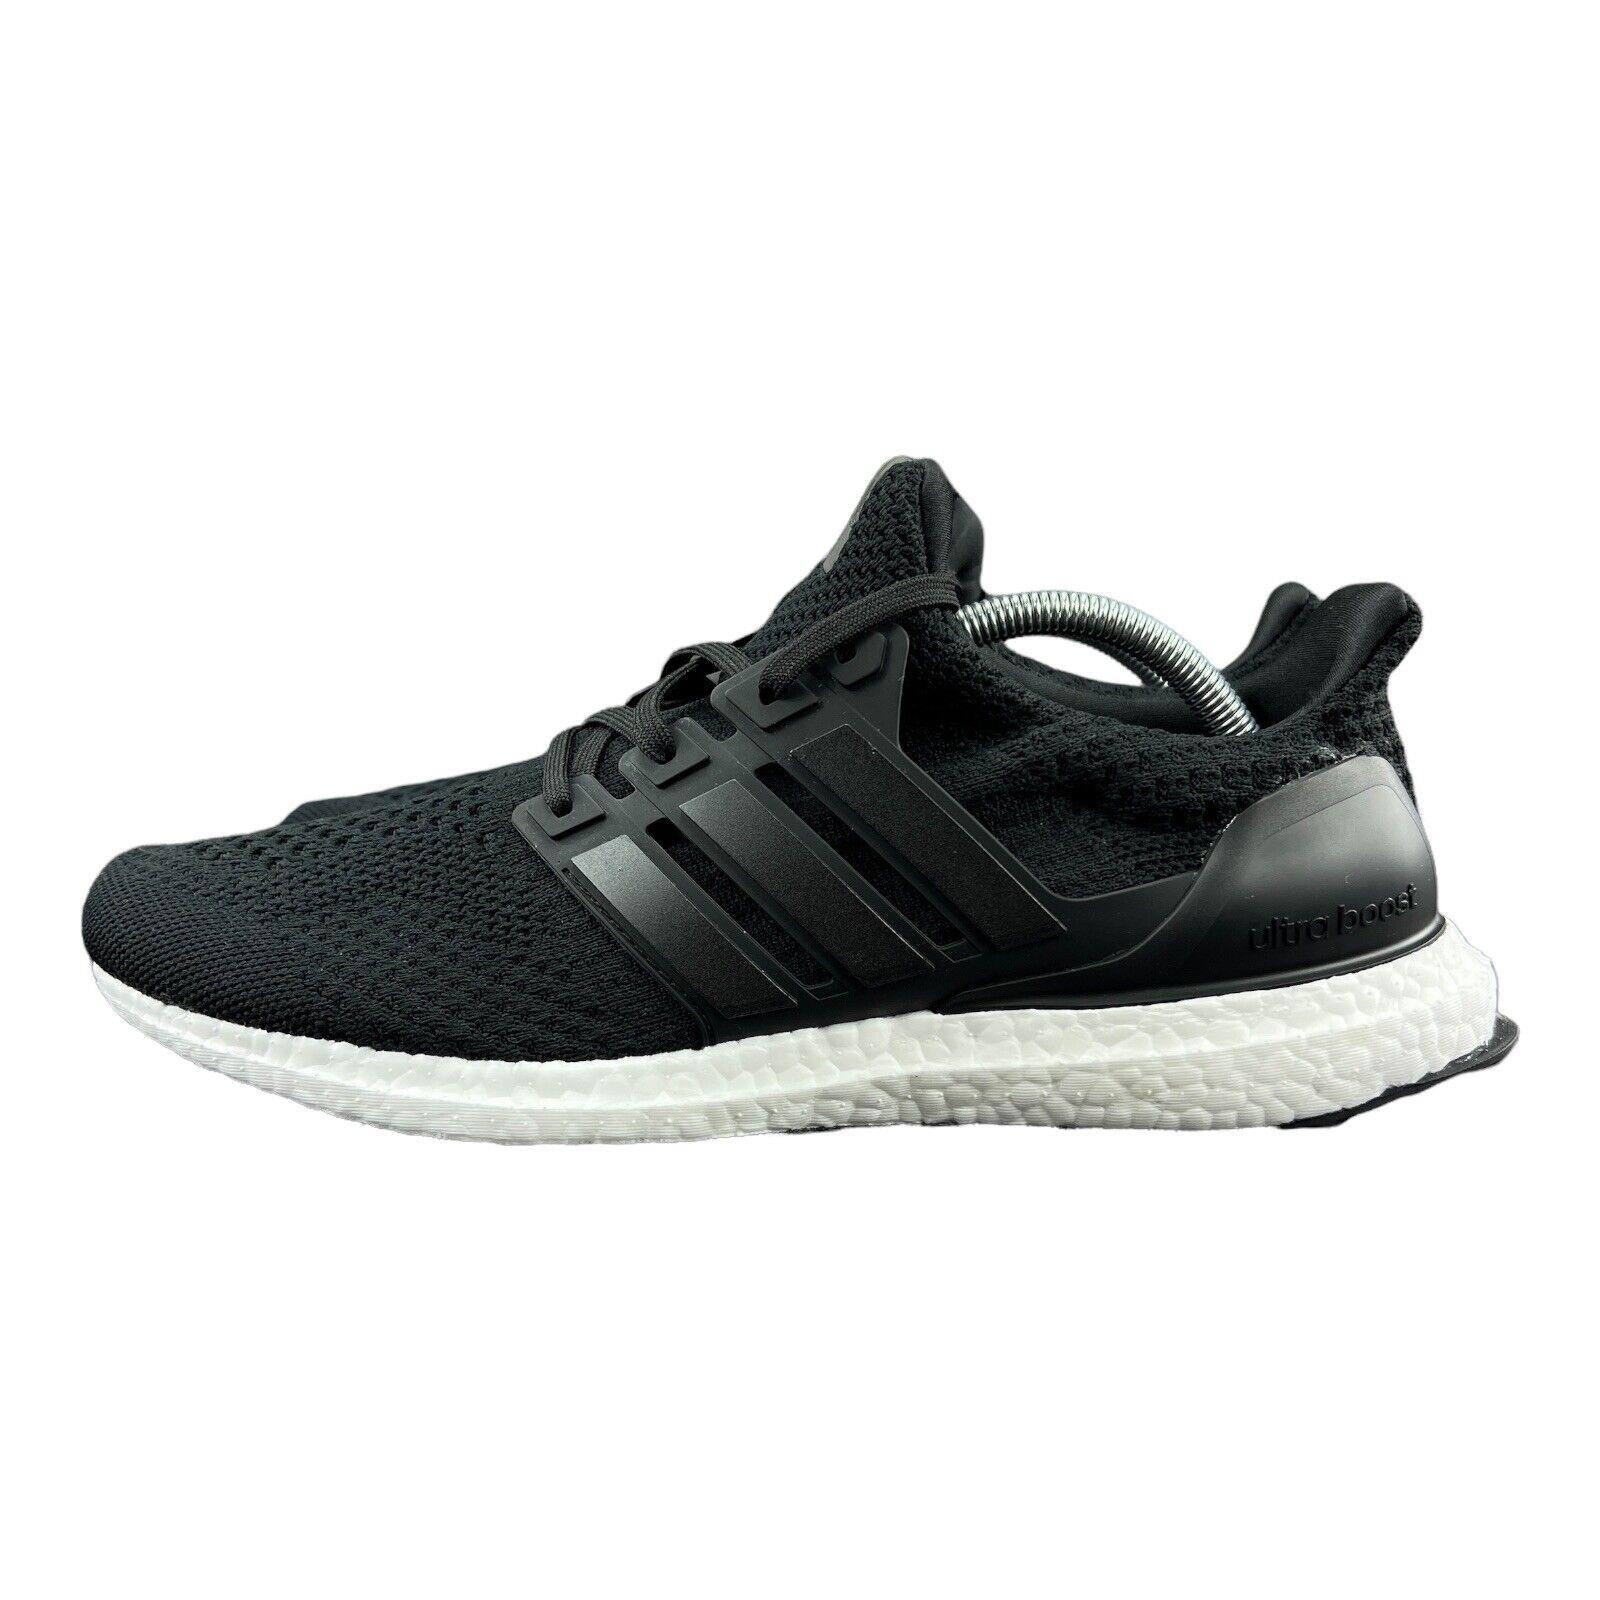 Adidas shoes UltraBoost DNA - Black 1